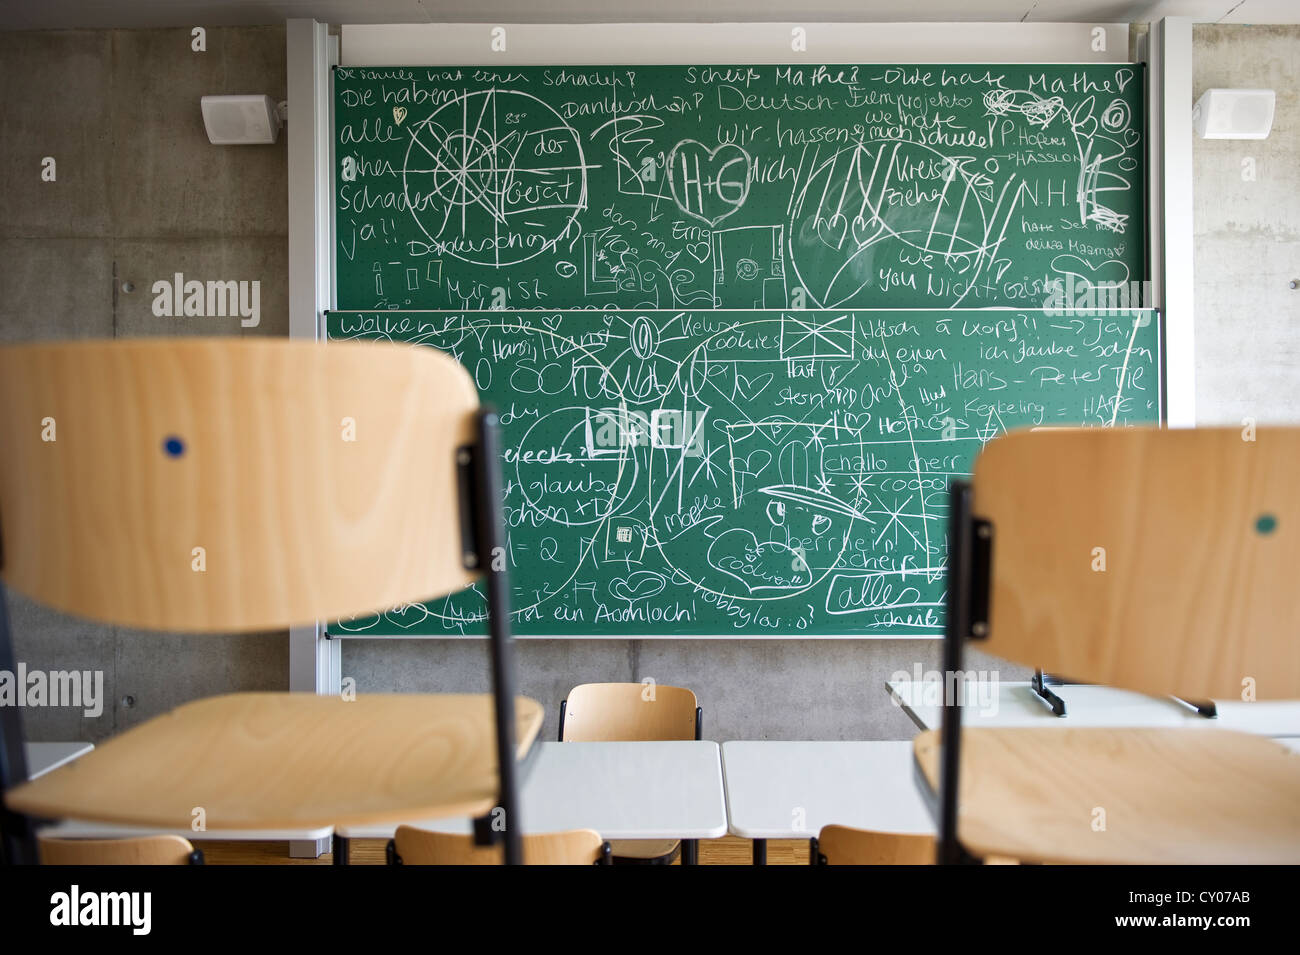 Classroom of a grammar school with chairs and a blackboard covered with writing Stock Photo